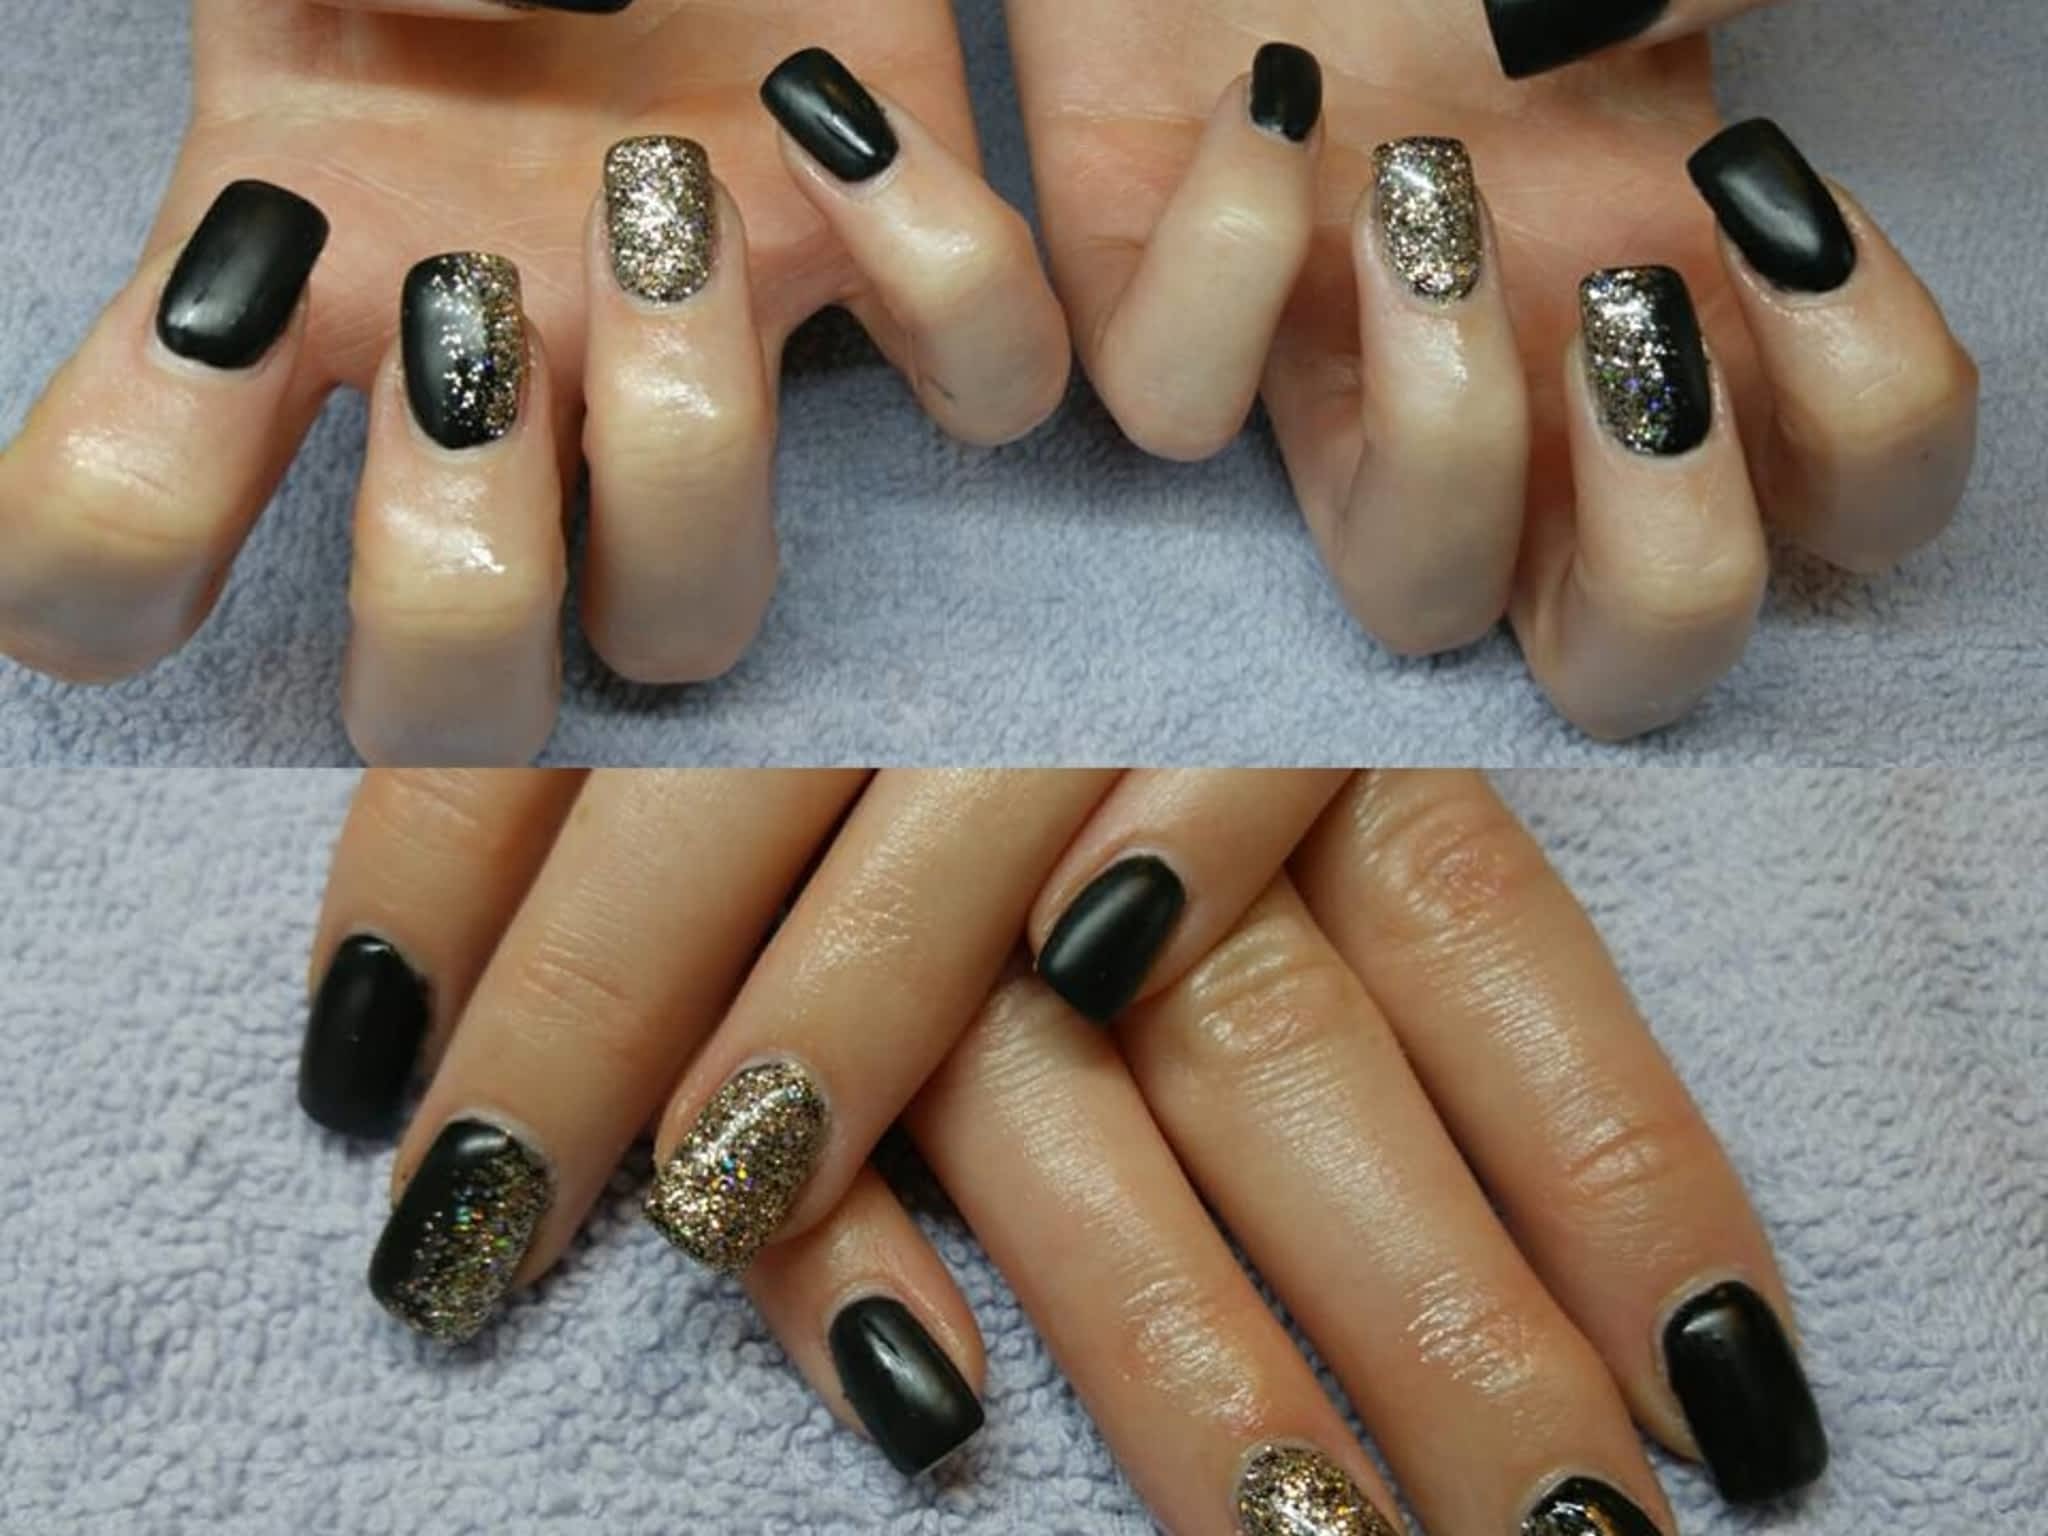 photo Sculpted Gel Nails by Chanell